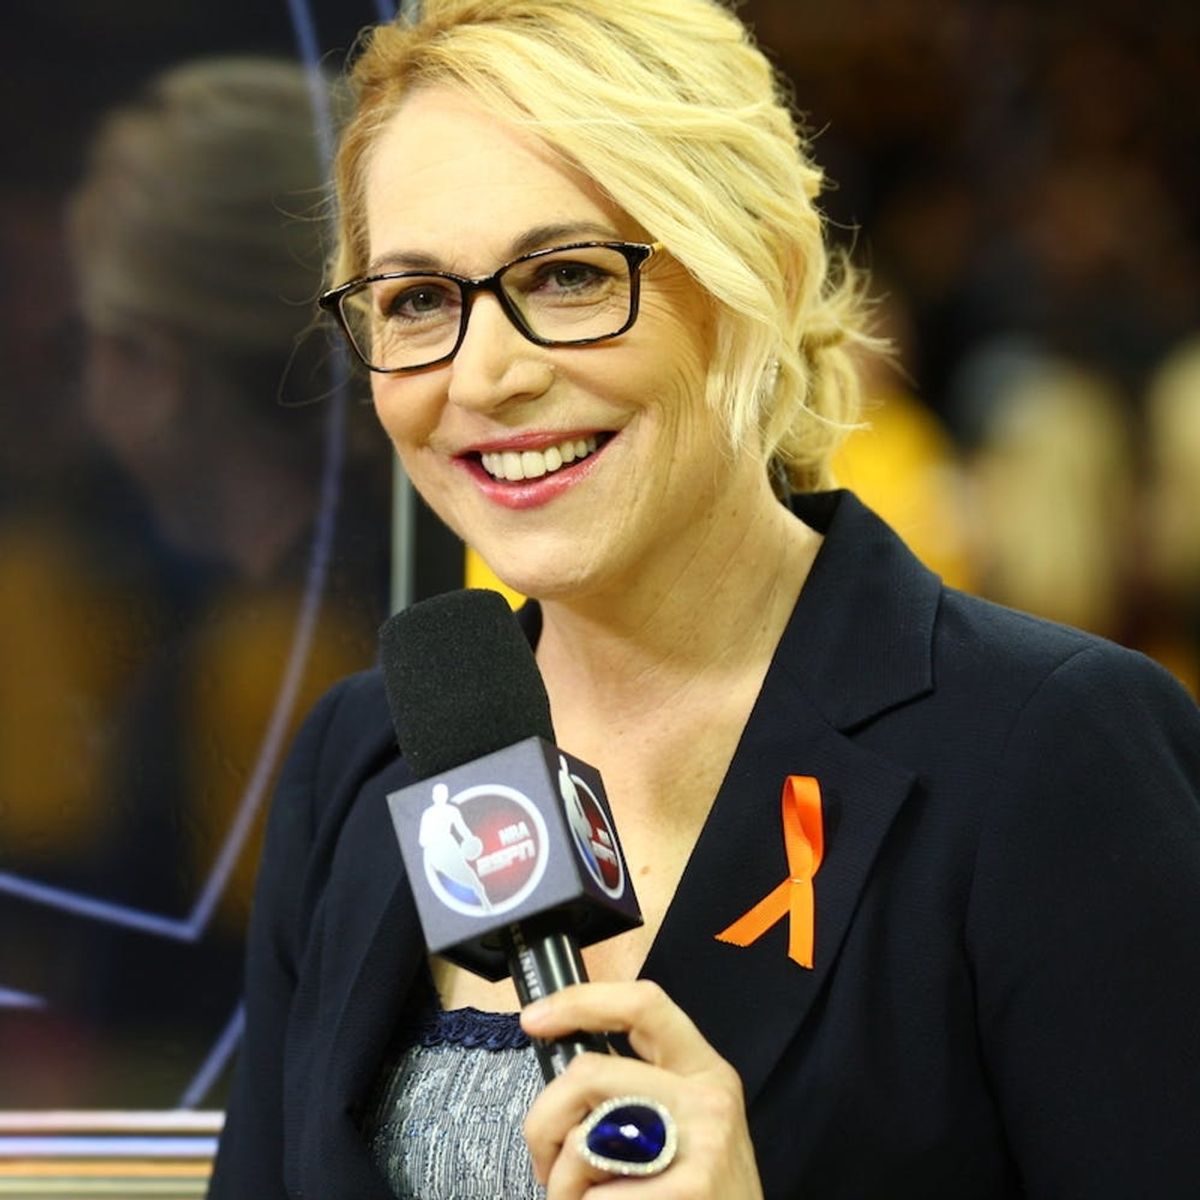 How Doris Burke Is Making History As ESPN’s FIRST Female, Full-time NBA Analyst